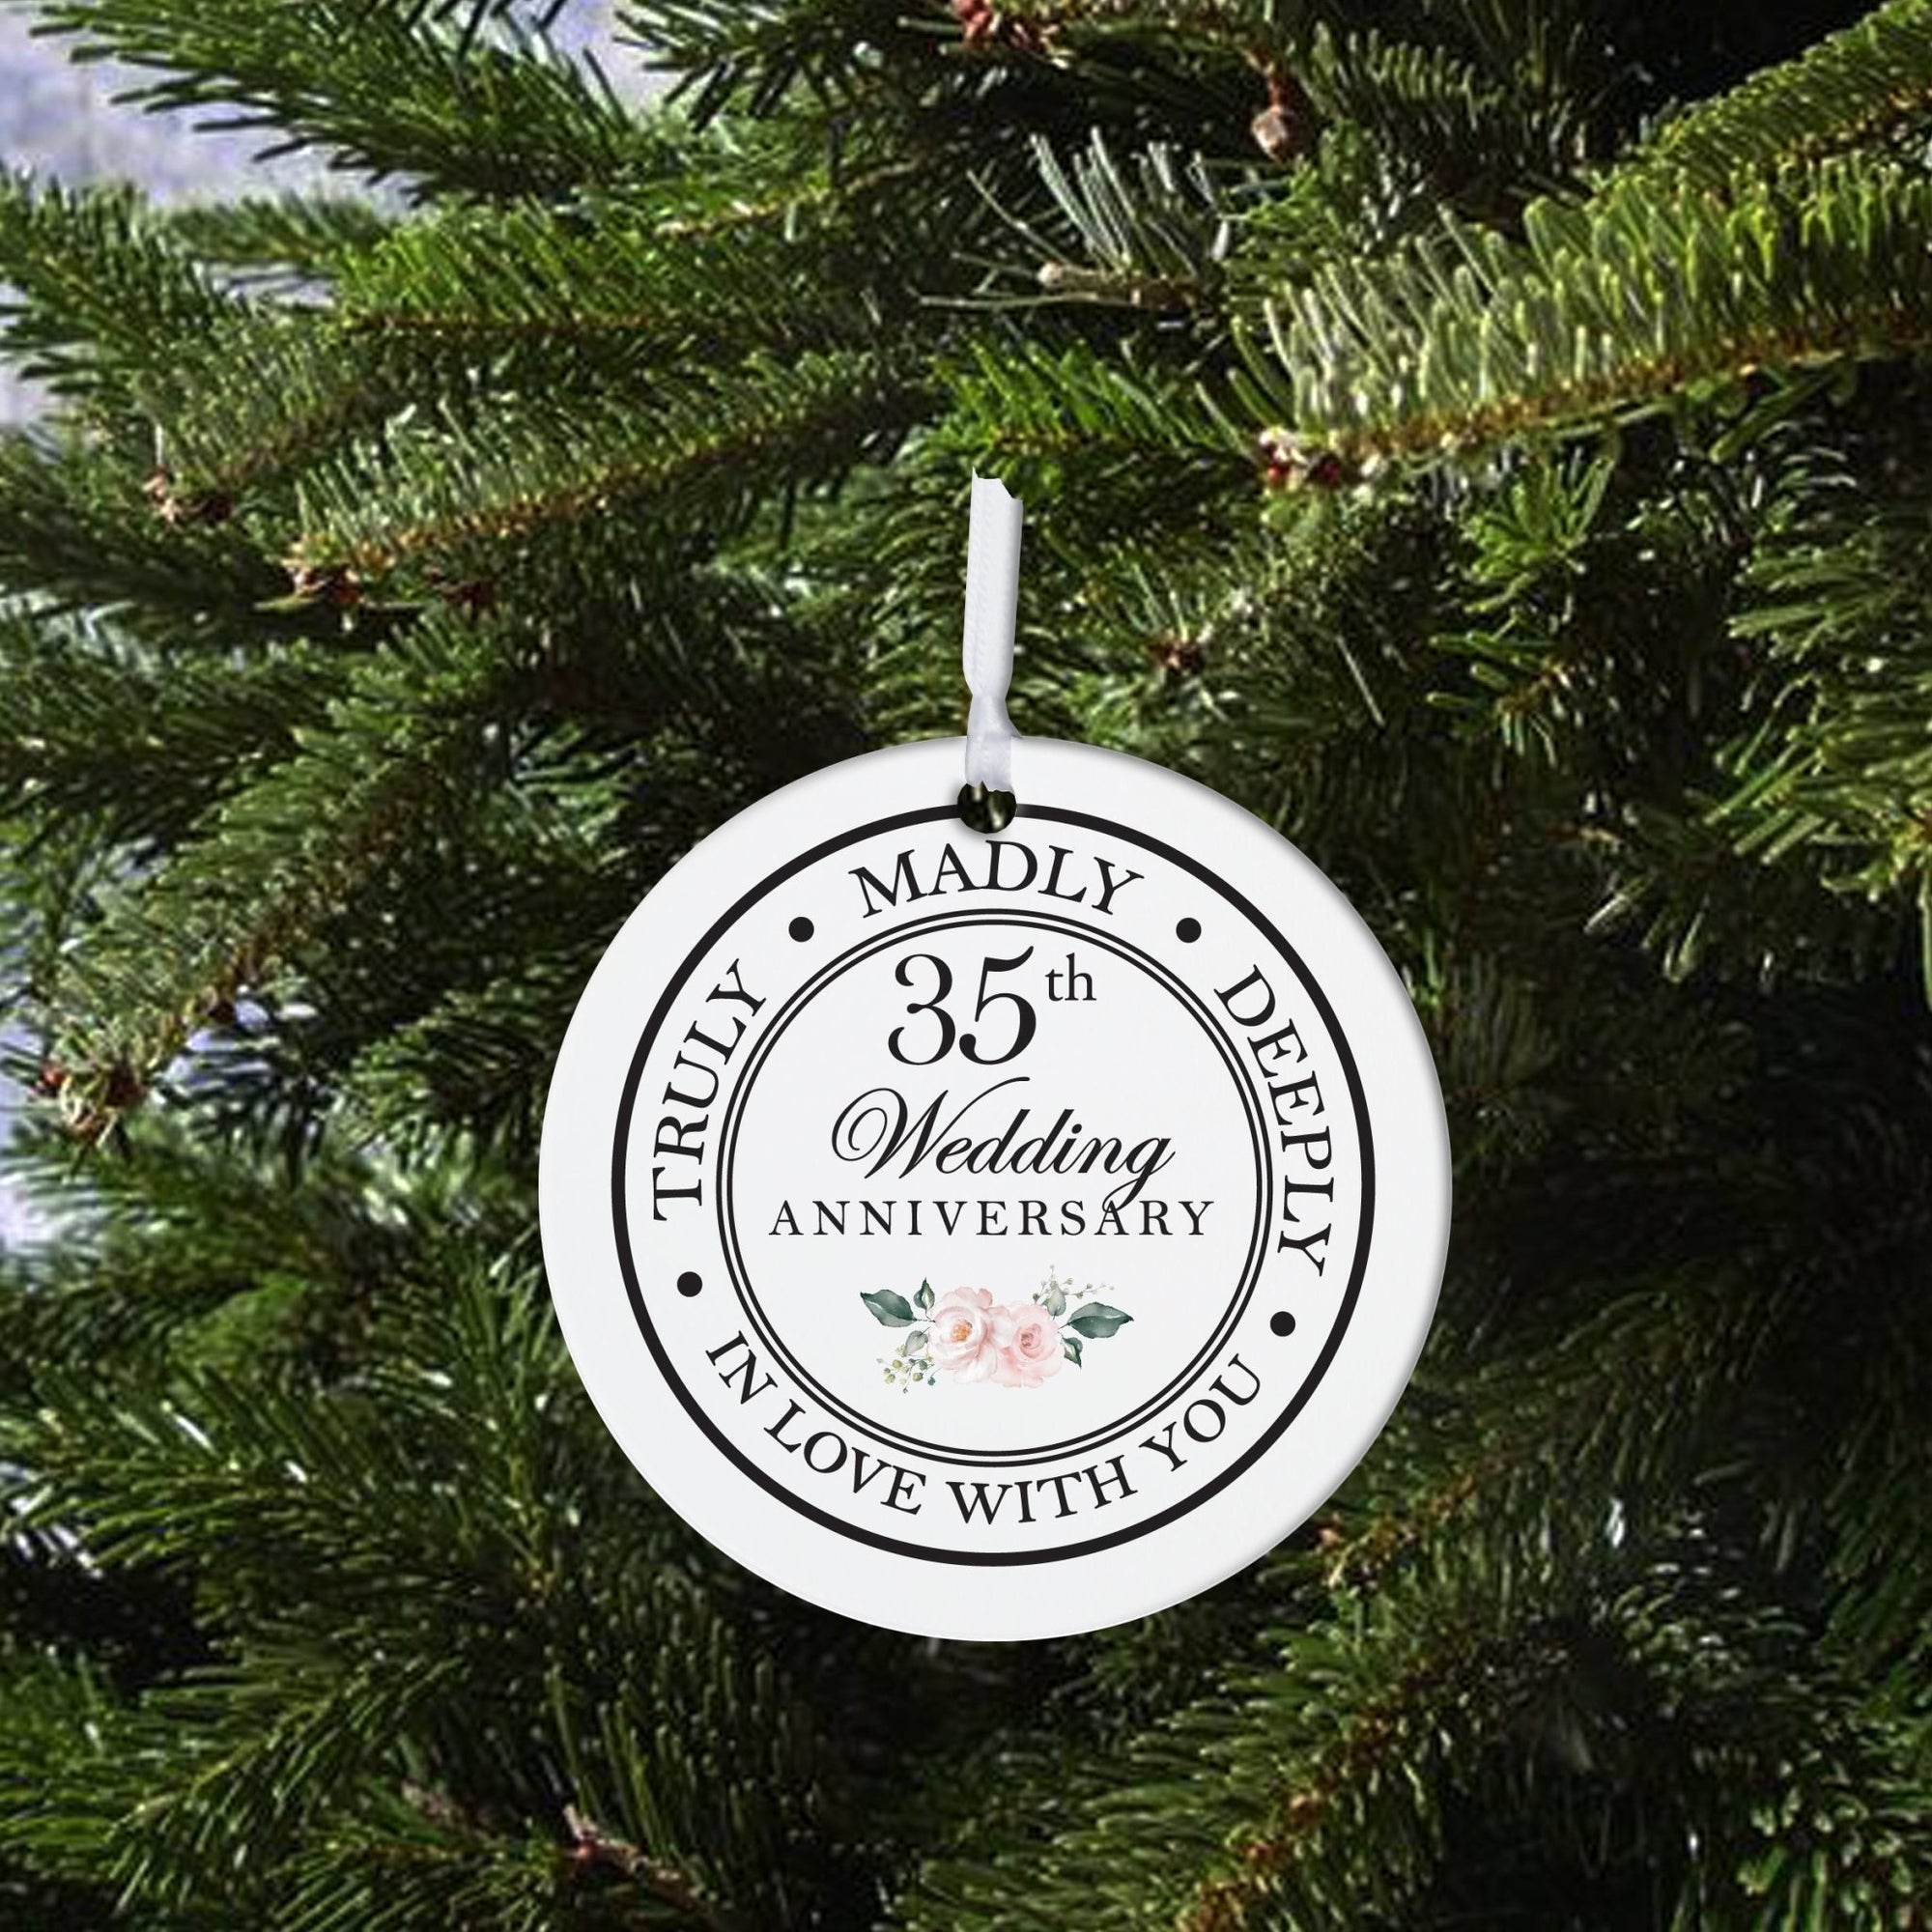 35th Wedding Anniversary White Ornament With Inspirational Message Gift Ideas - Truly, Madly, Deeply In Love With You - LifeSong Milestones